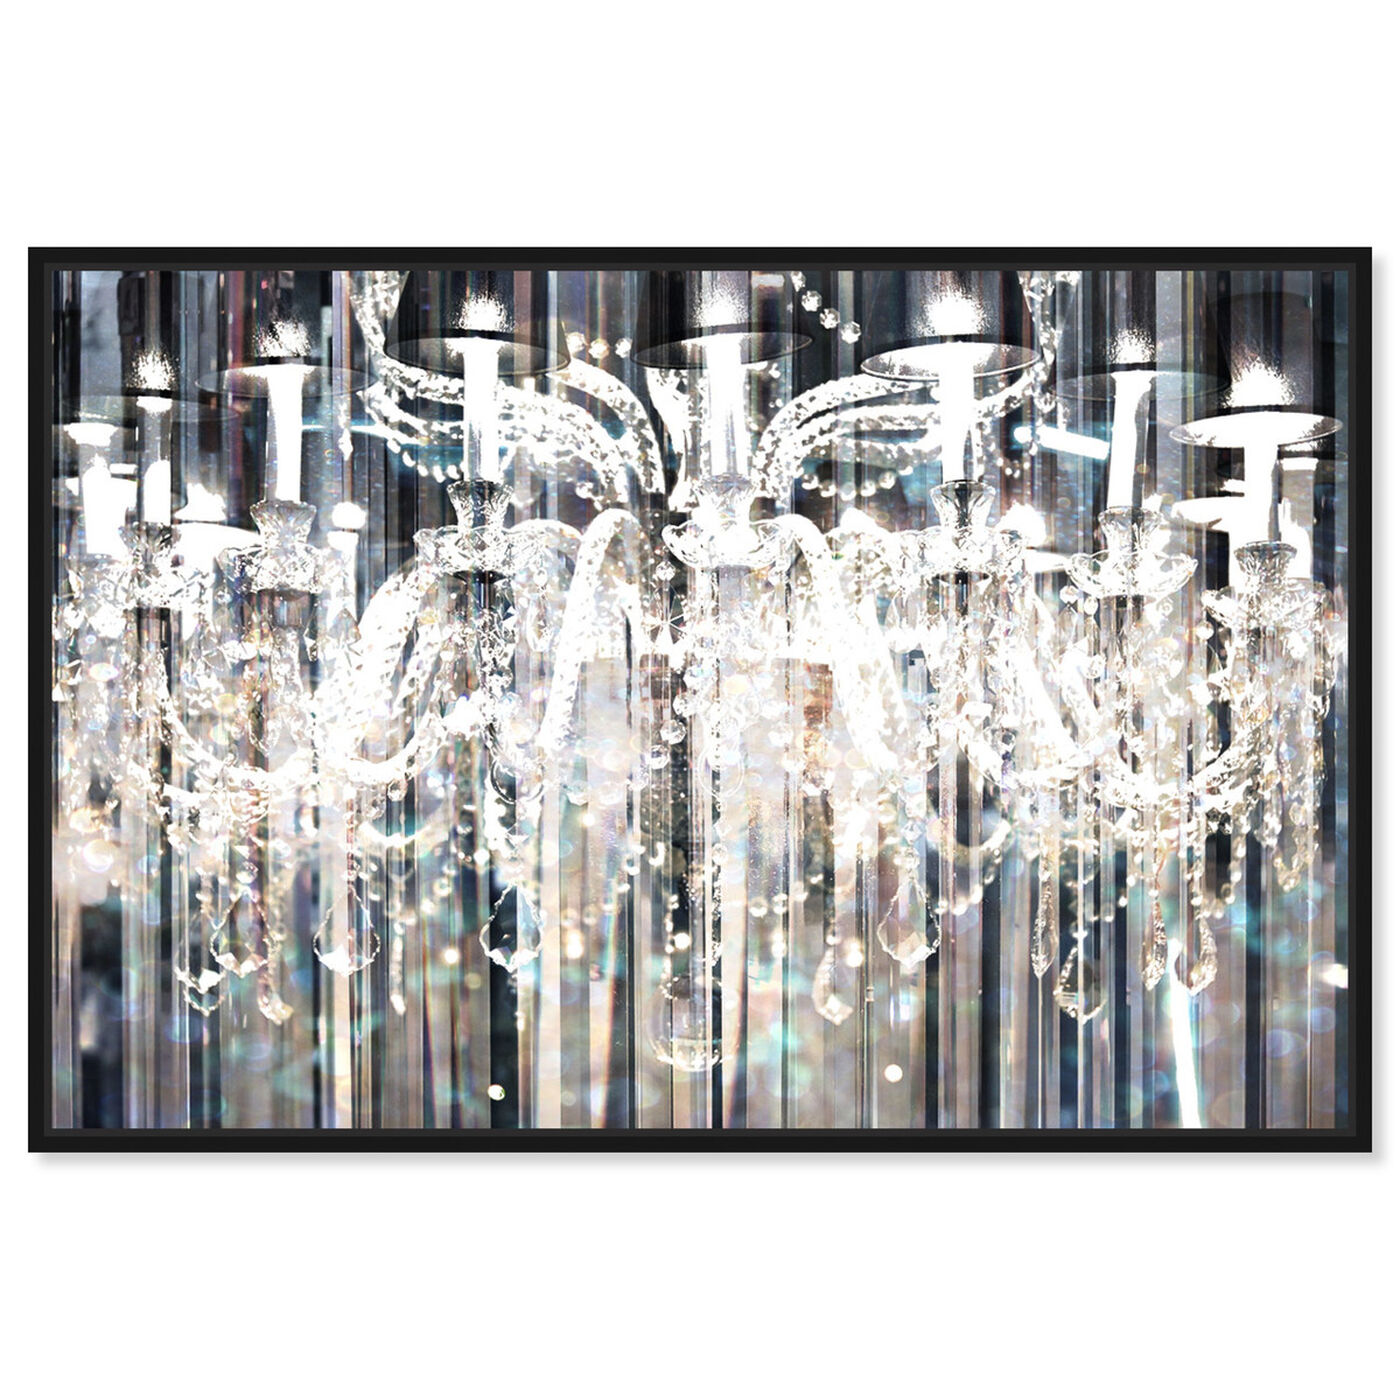 Front view of Diamond Shower featuring fashion and glam and chandeliers art.